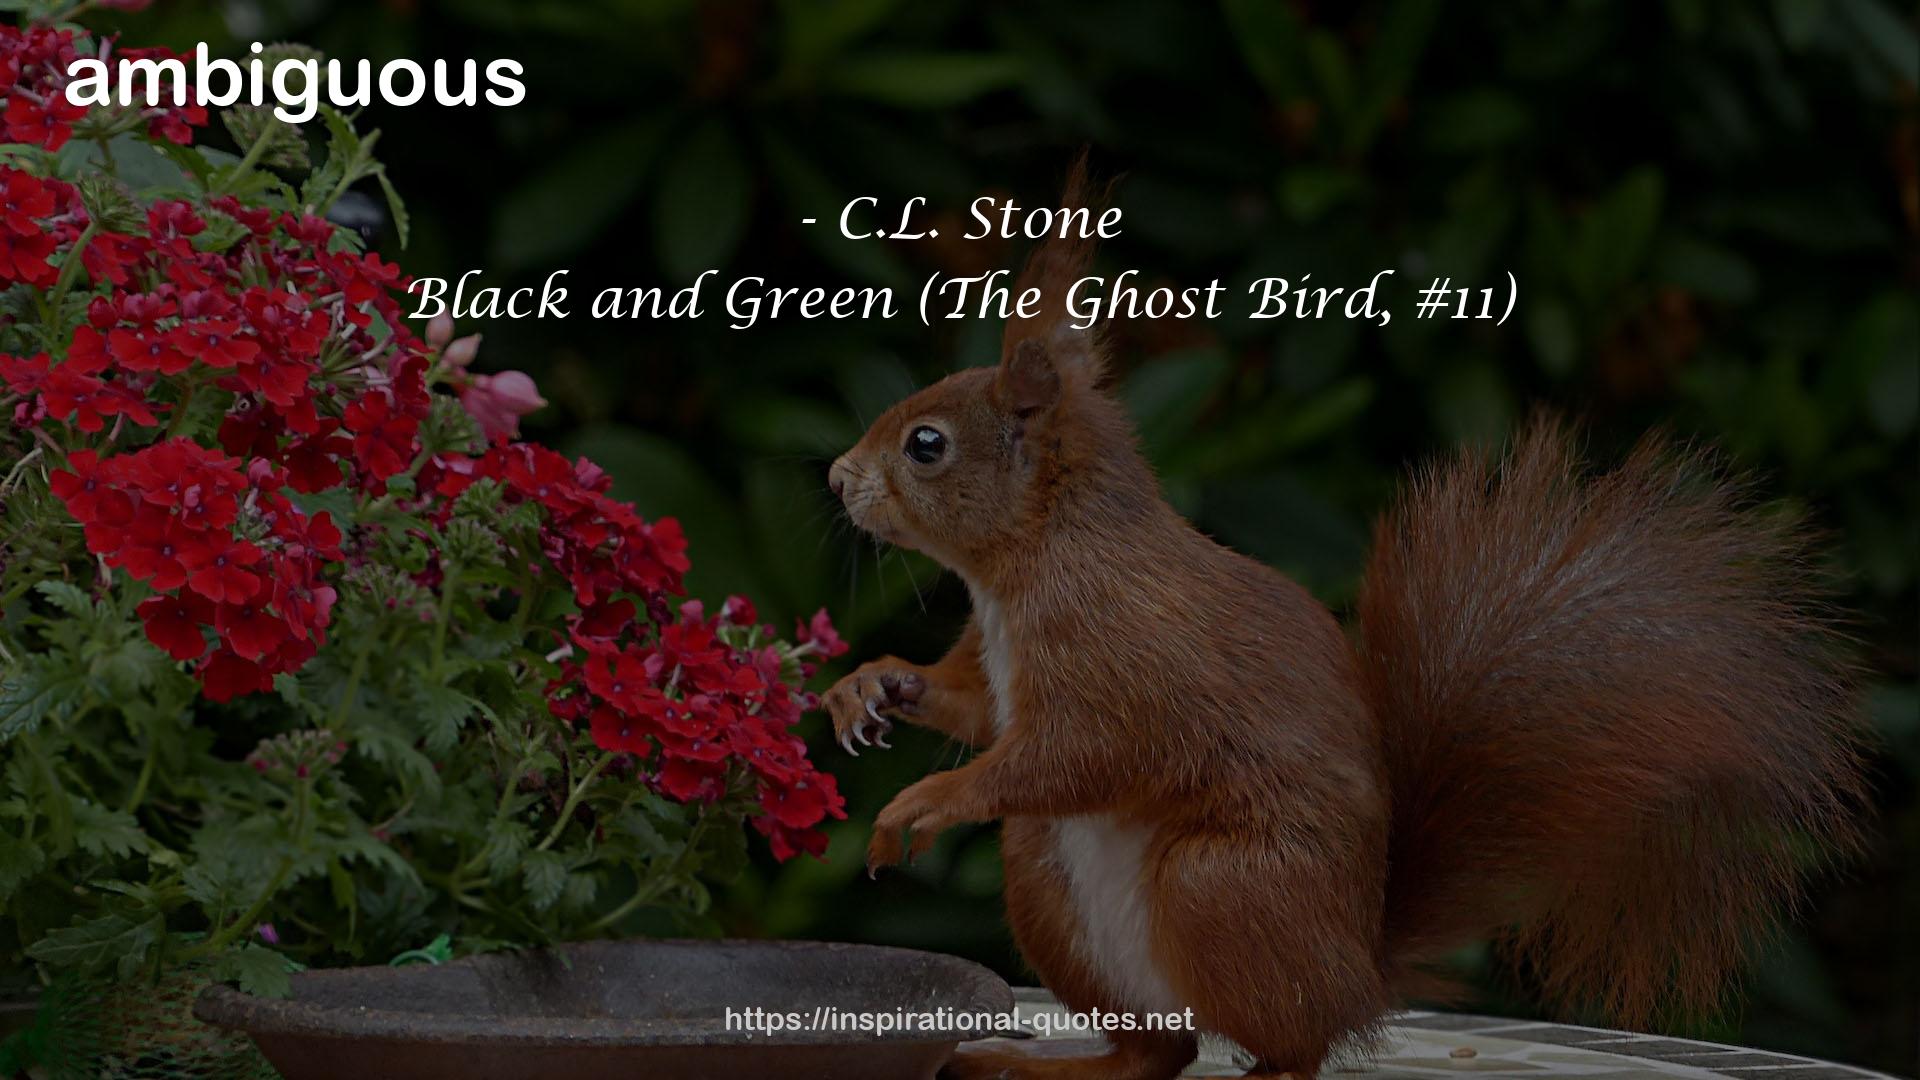 Black and Green (The Ghost Bird, #11) QUOTES